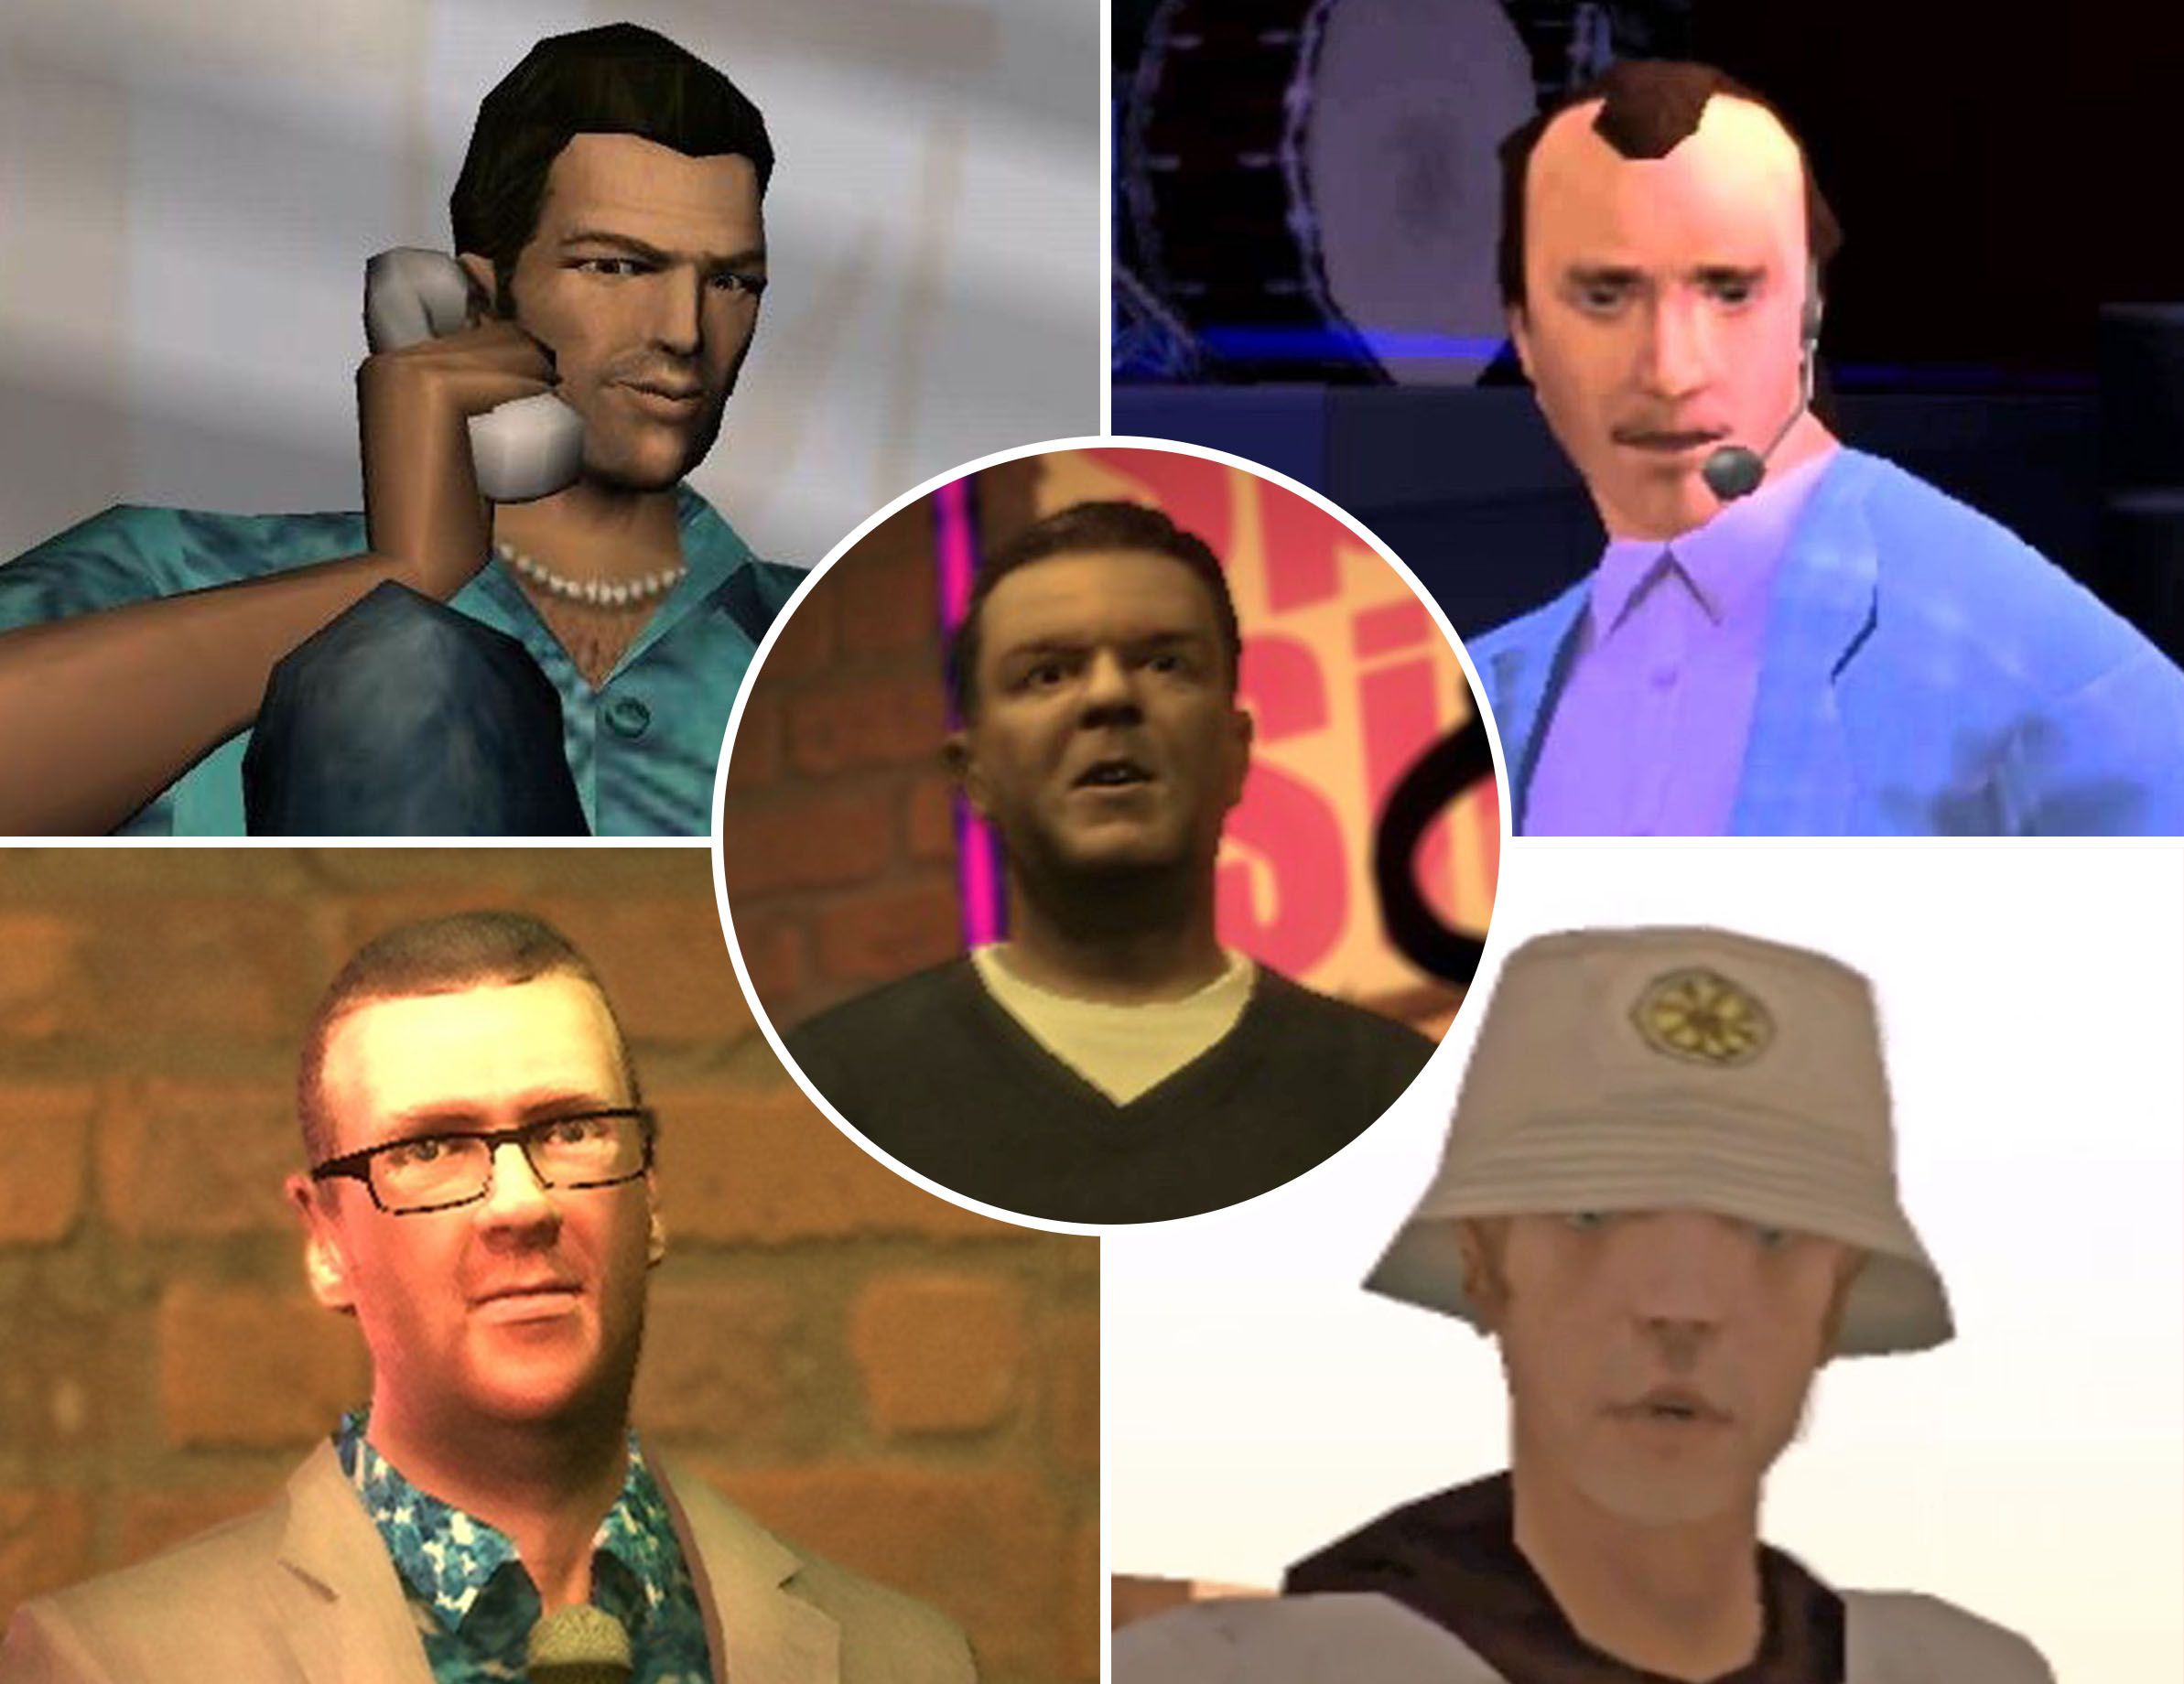 How much are the voice actors in Grand Theft Auto V paid? - Quora